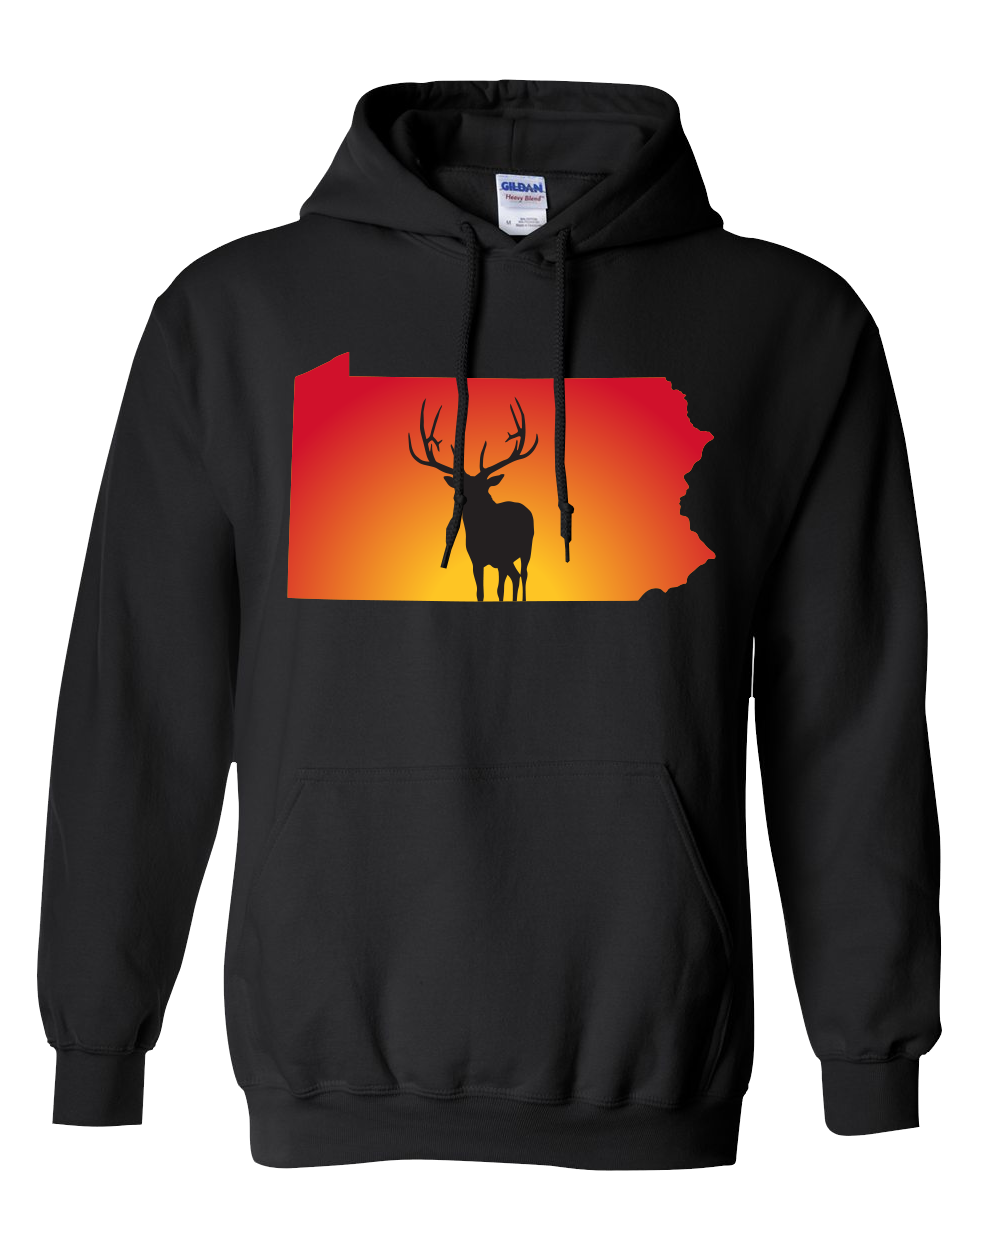 Pullover Hooded Sweatshirt Pennsylvania Black Elk Vibrant Design High Quality Tight Knit Ring Spun Low Maintenance Cotton Printed With The Newest Available Color Transfer Technology